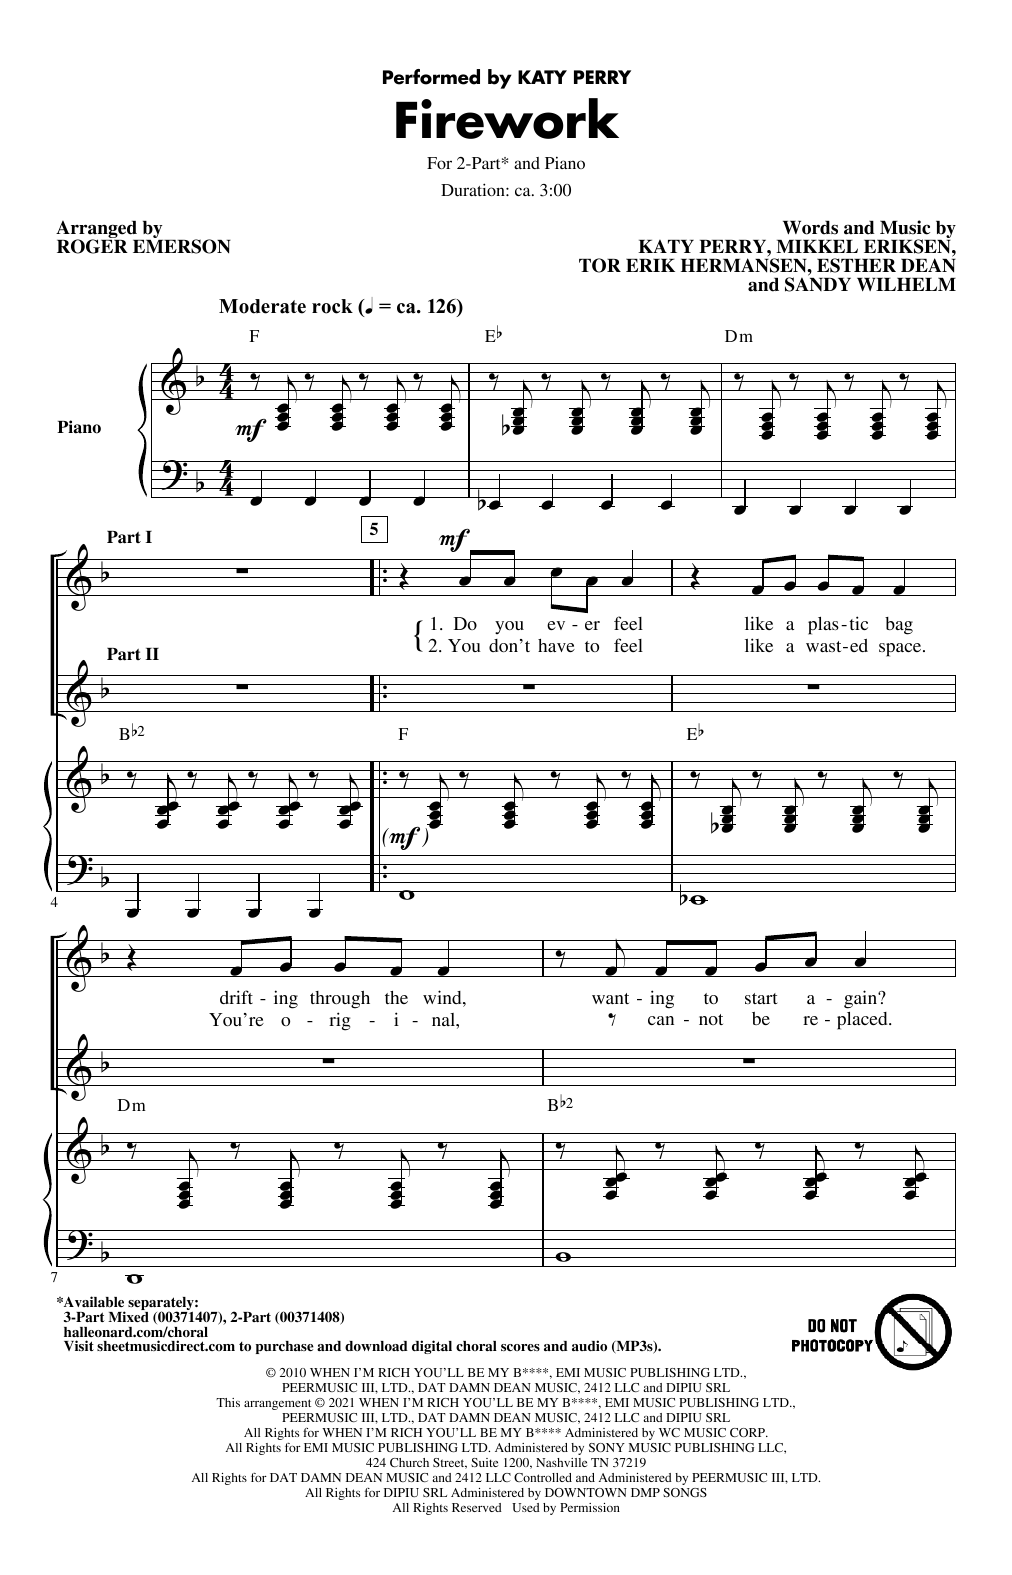 Download Katy Perry Firework (arr. Roger Emerson) Sheet Music